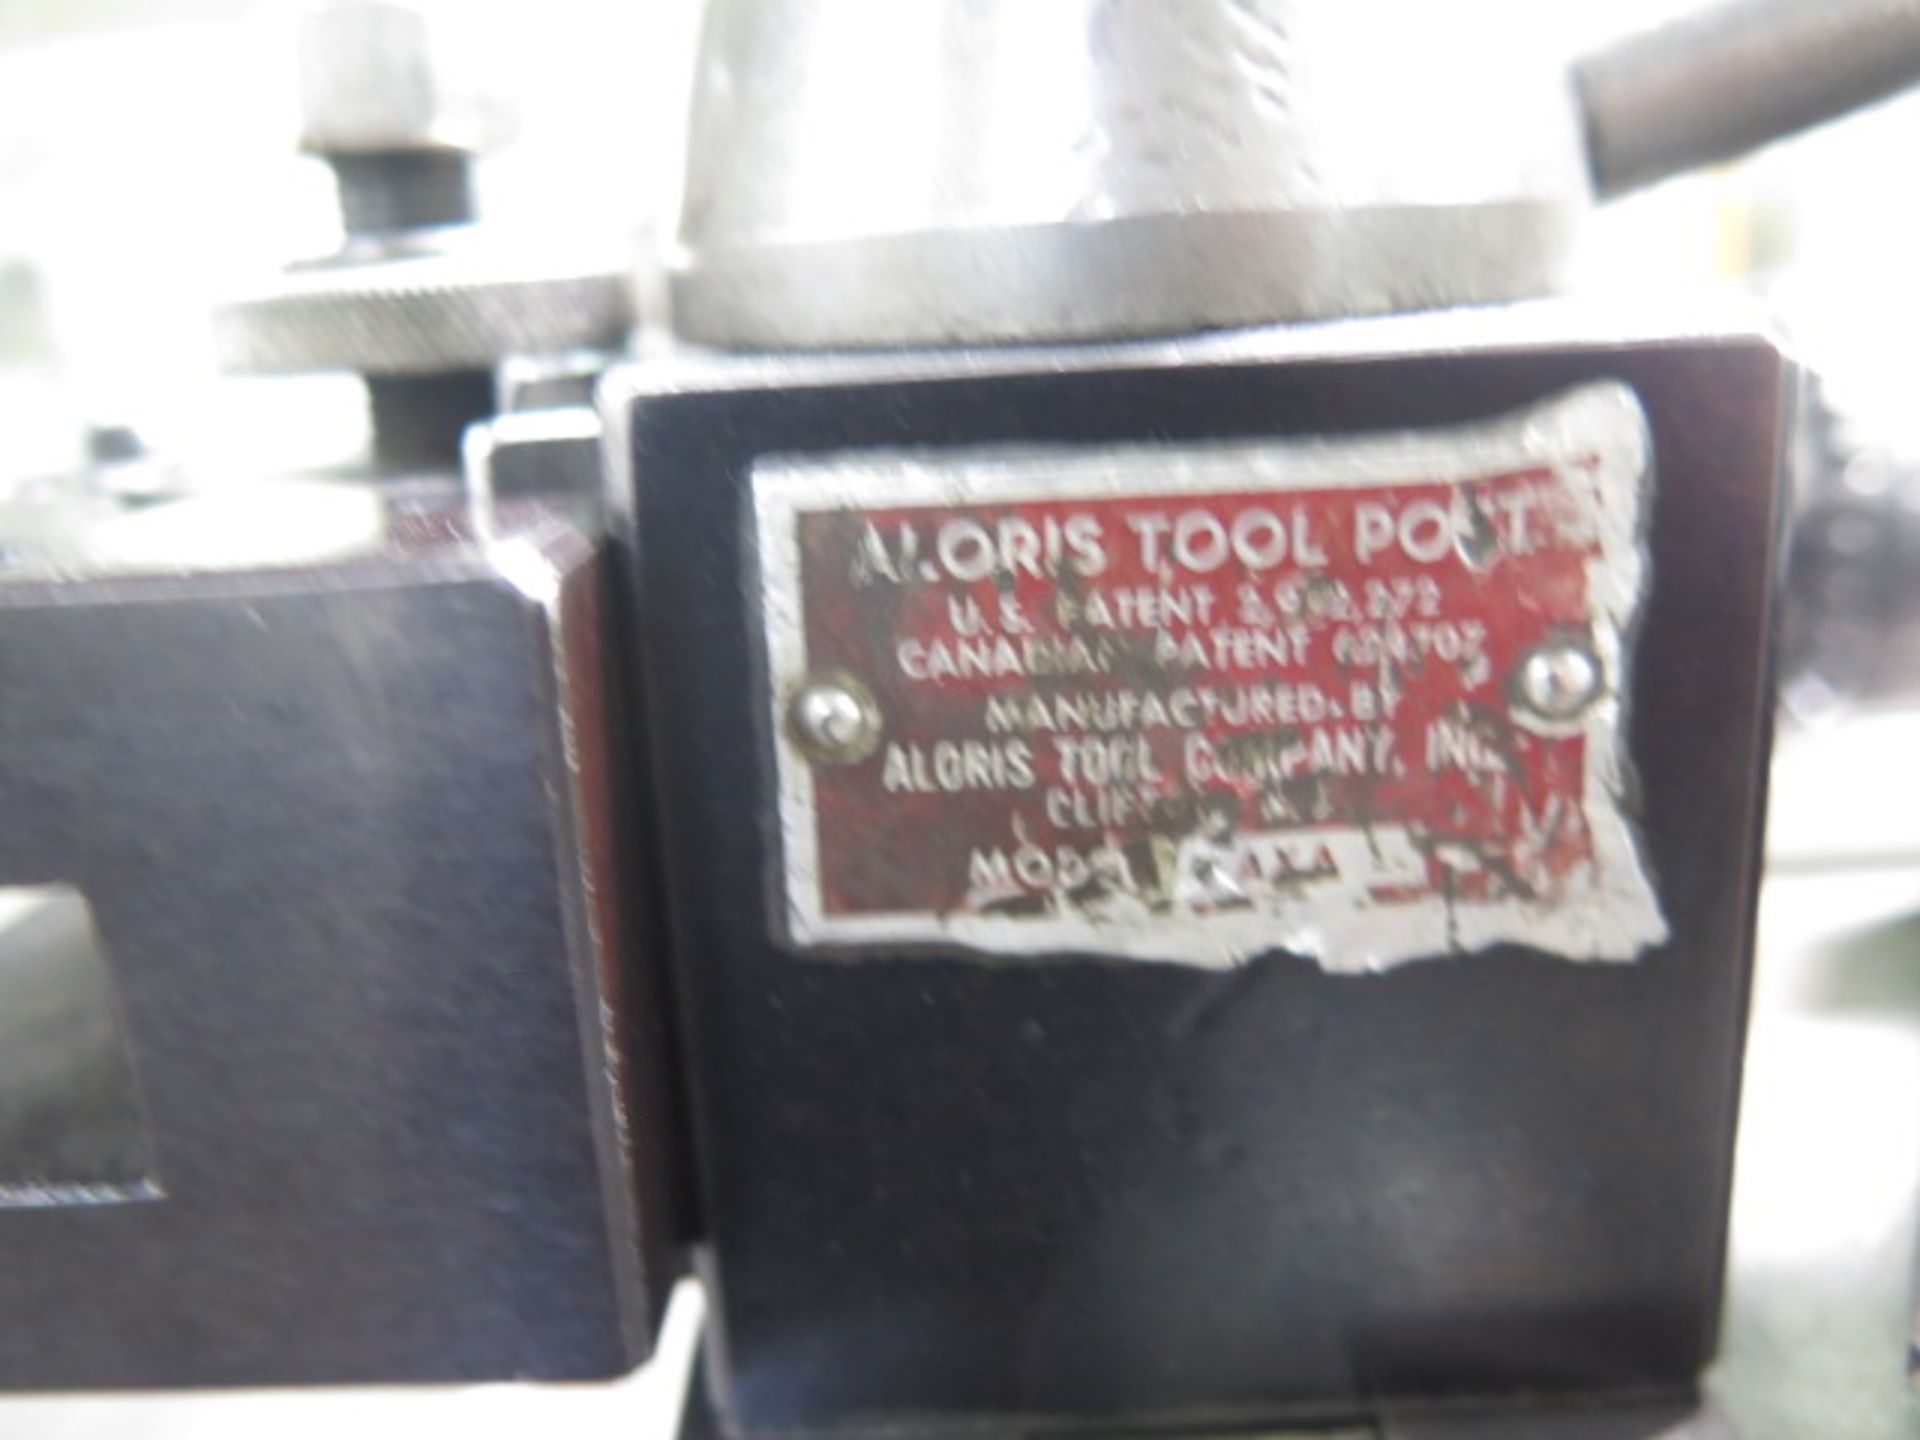 Hardinge TFB Second OP Lathe w/ 125-3000 RPM, 5C Collet Closer, PF, Aloris Tool Post, SOLD AS IS - Image 6 of 10